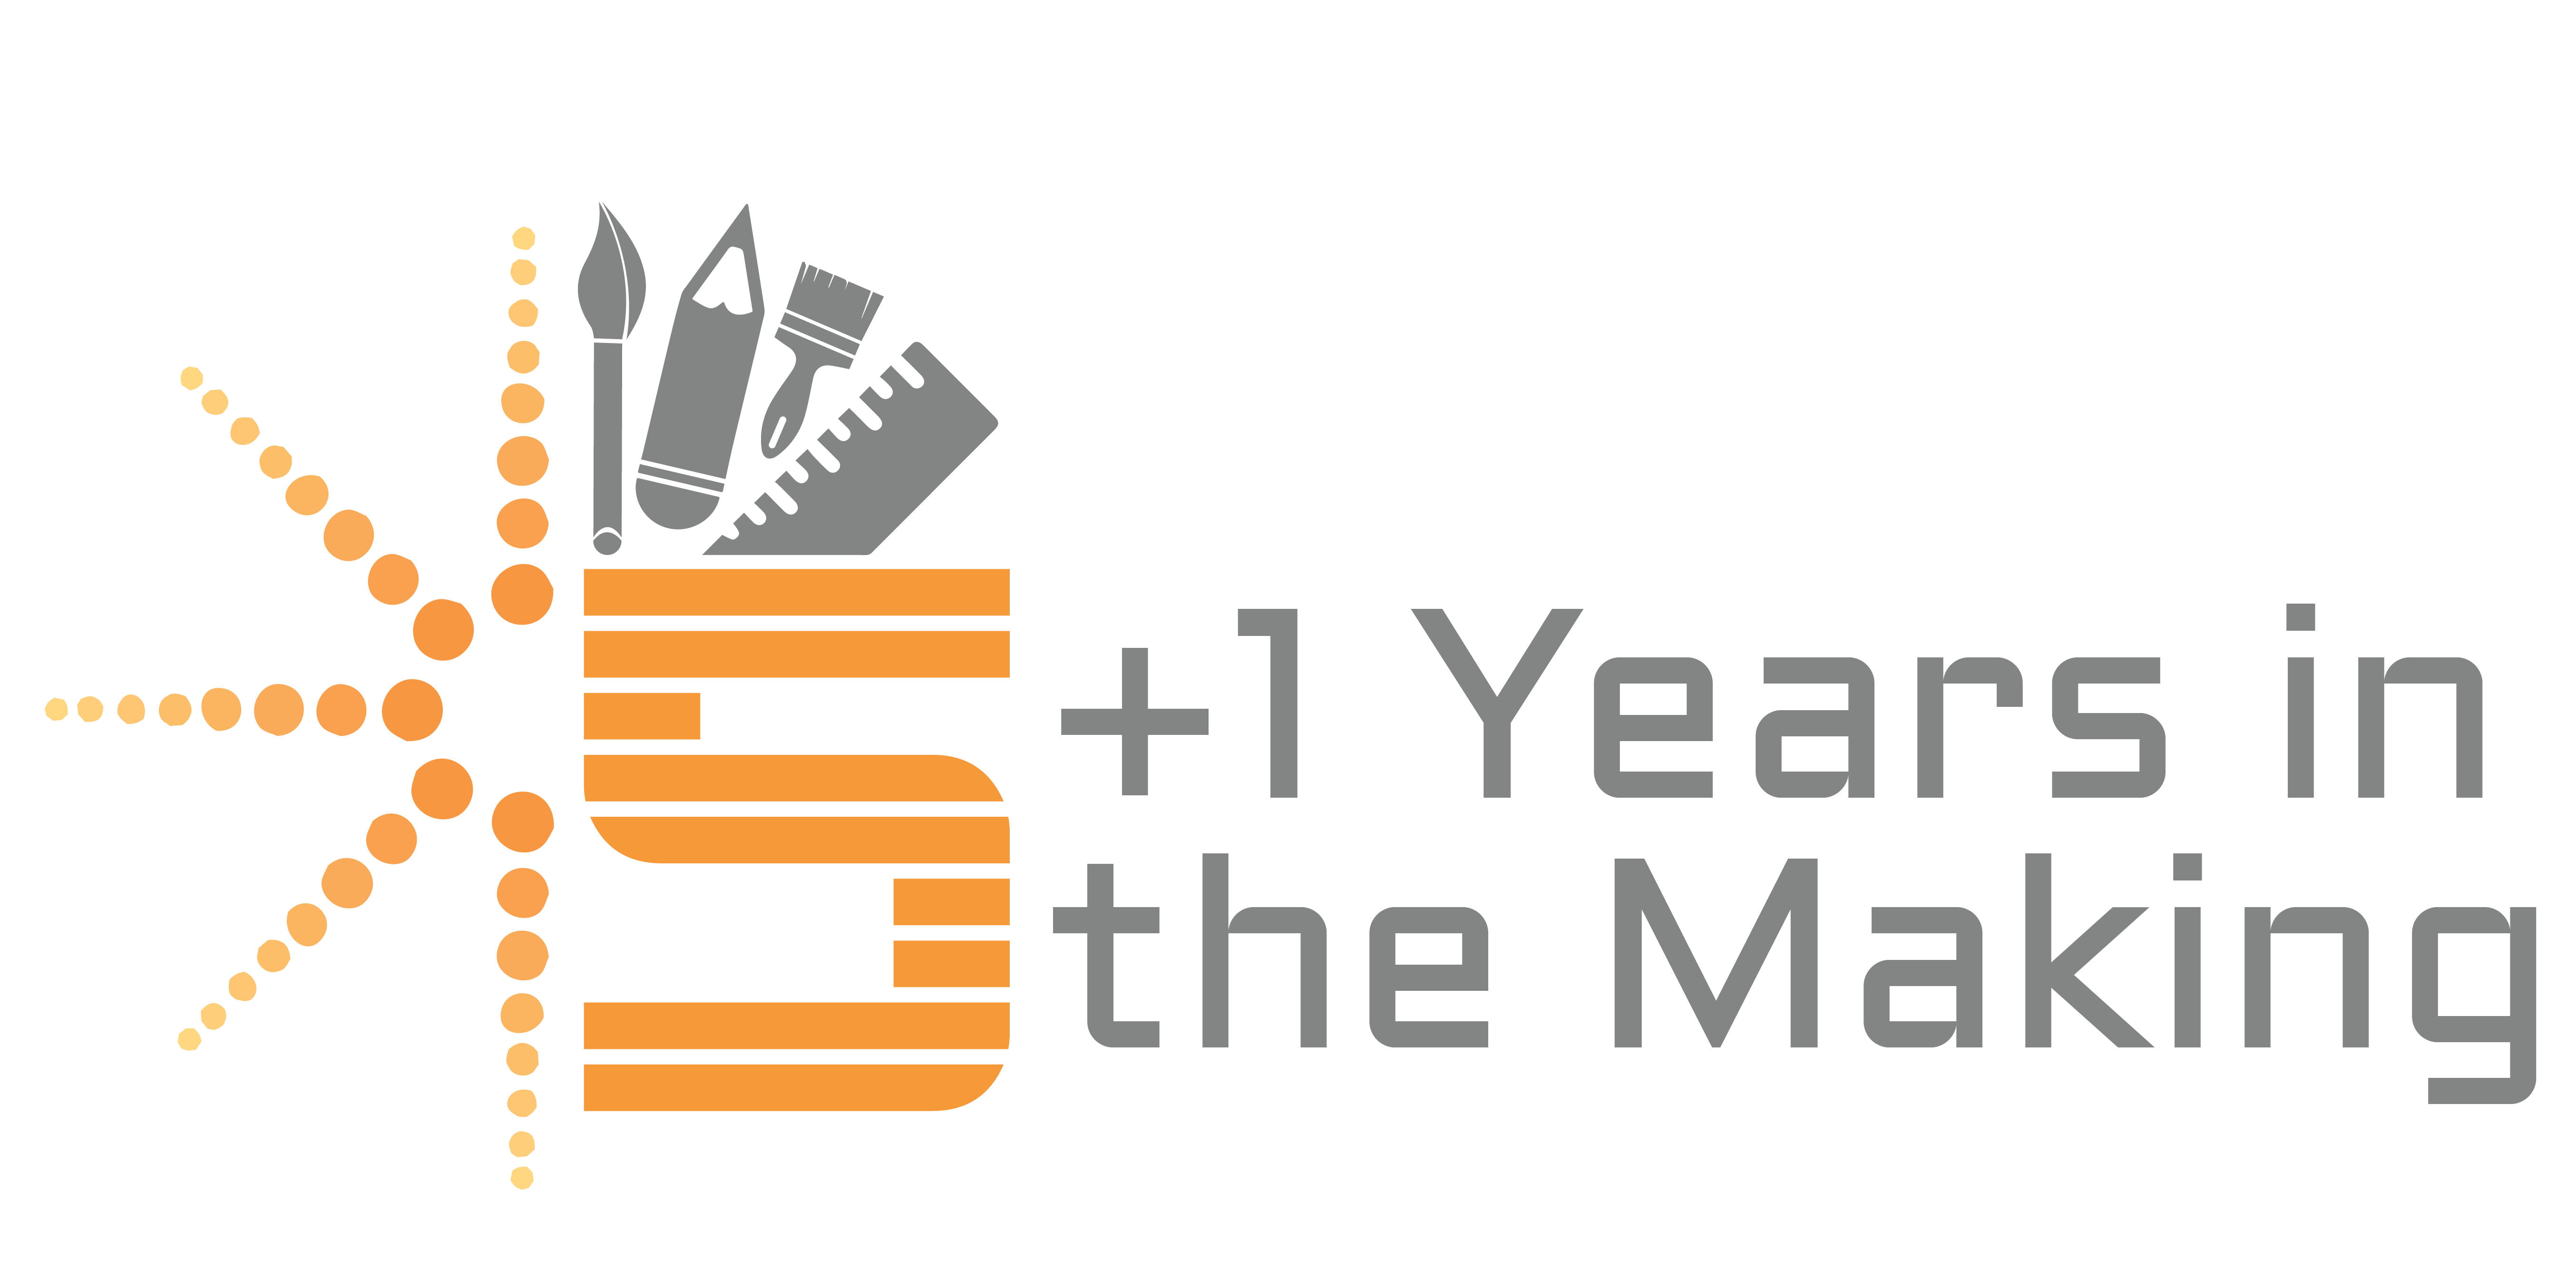 5+1 Years in the Making, the logo for the Collaboratory Anniversary Celebration